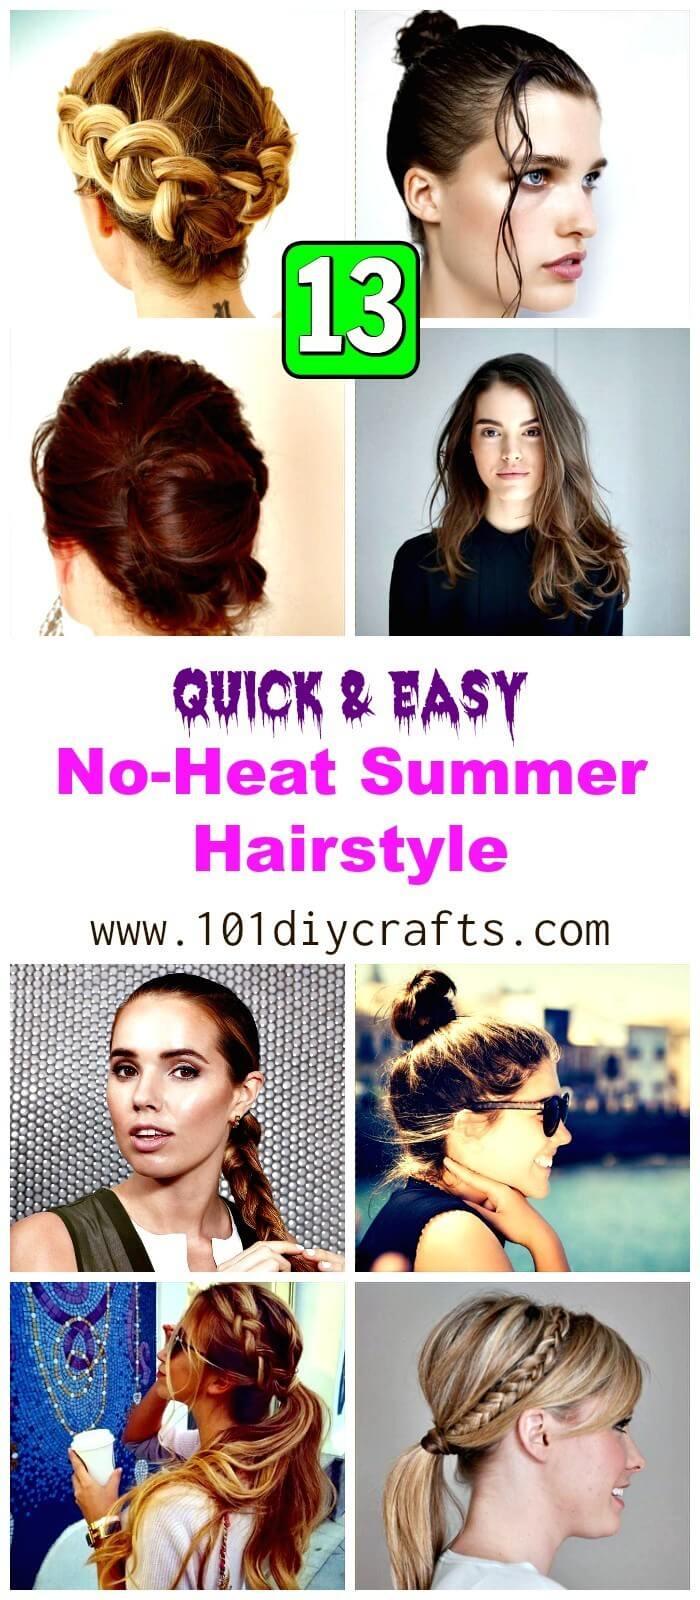 13 Quick & Easy No-Heat Summer Hairstyle